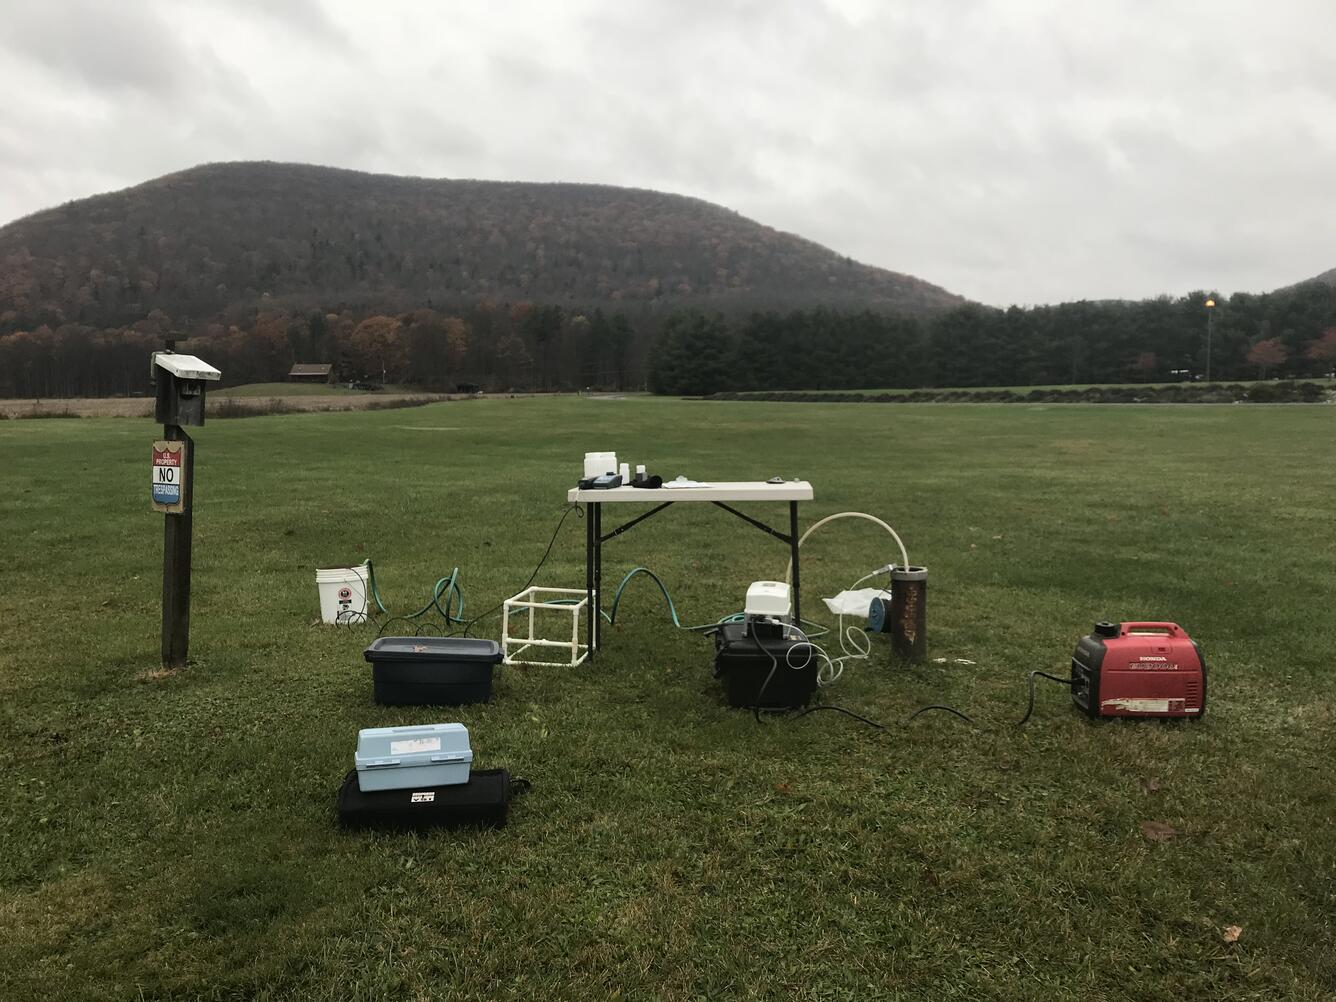 Gray skies. A park-like expanse of lawn with a hill in the background. A well and water-quality sampling equipment.